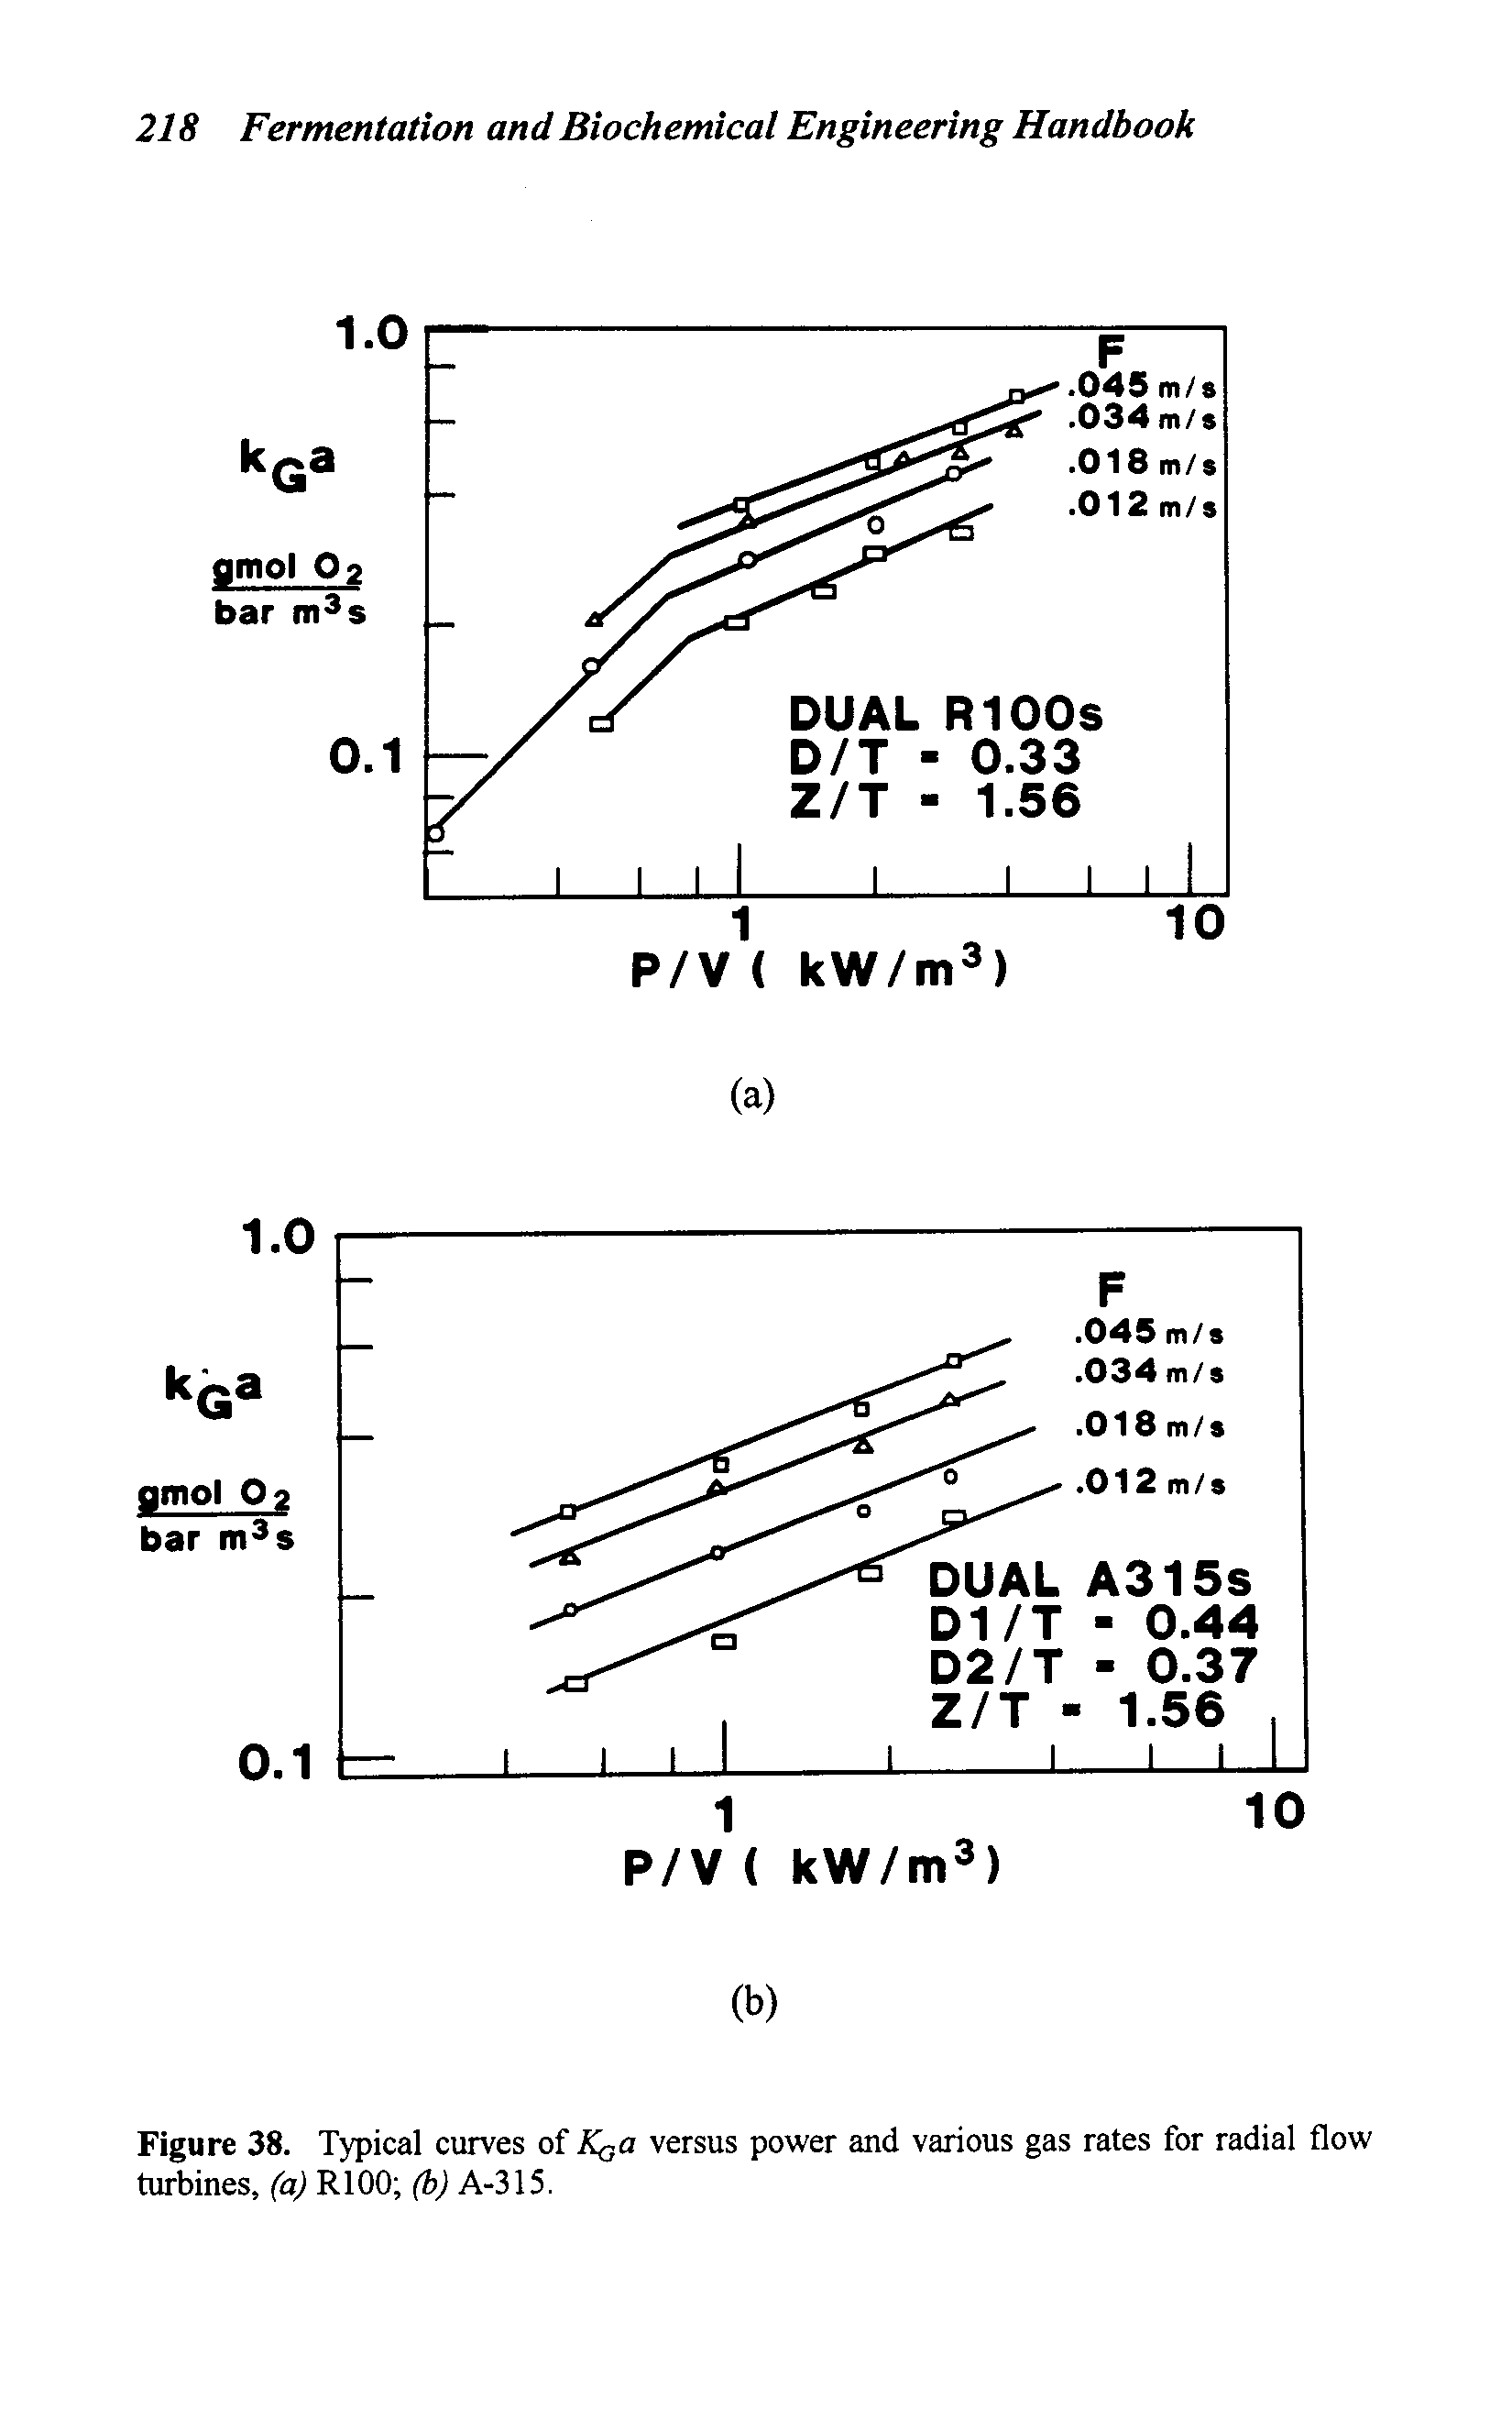 Figure 38. Typical curves oi K a versus power and various gas rates for radial flow turbines, (a) RlOO (b) A-315.